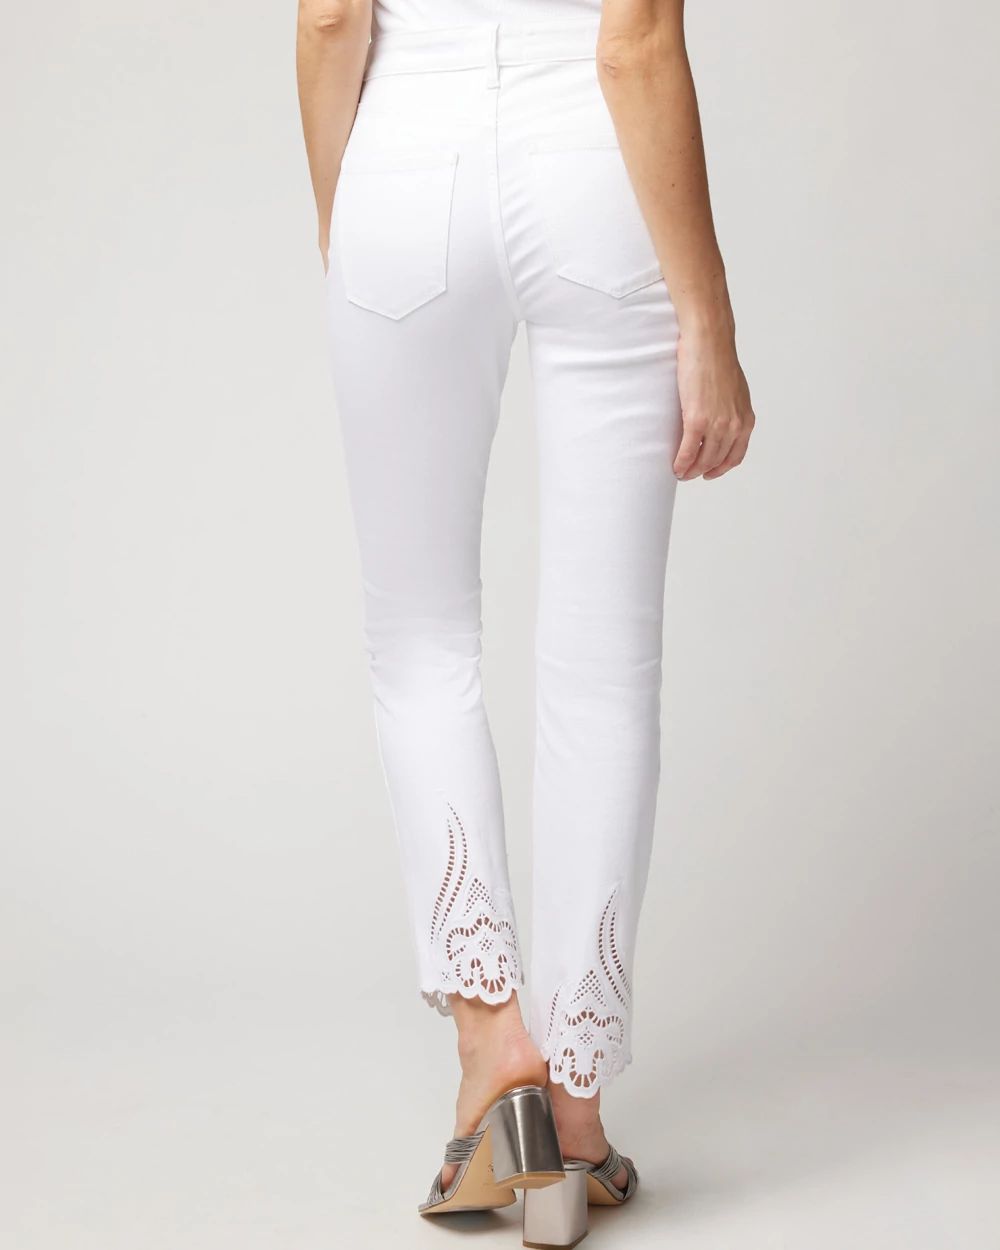 High-Rise Cutout Hem Bootcut Crop Jeans click to view larger image.